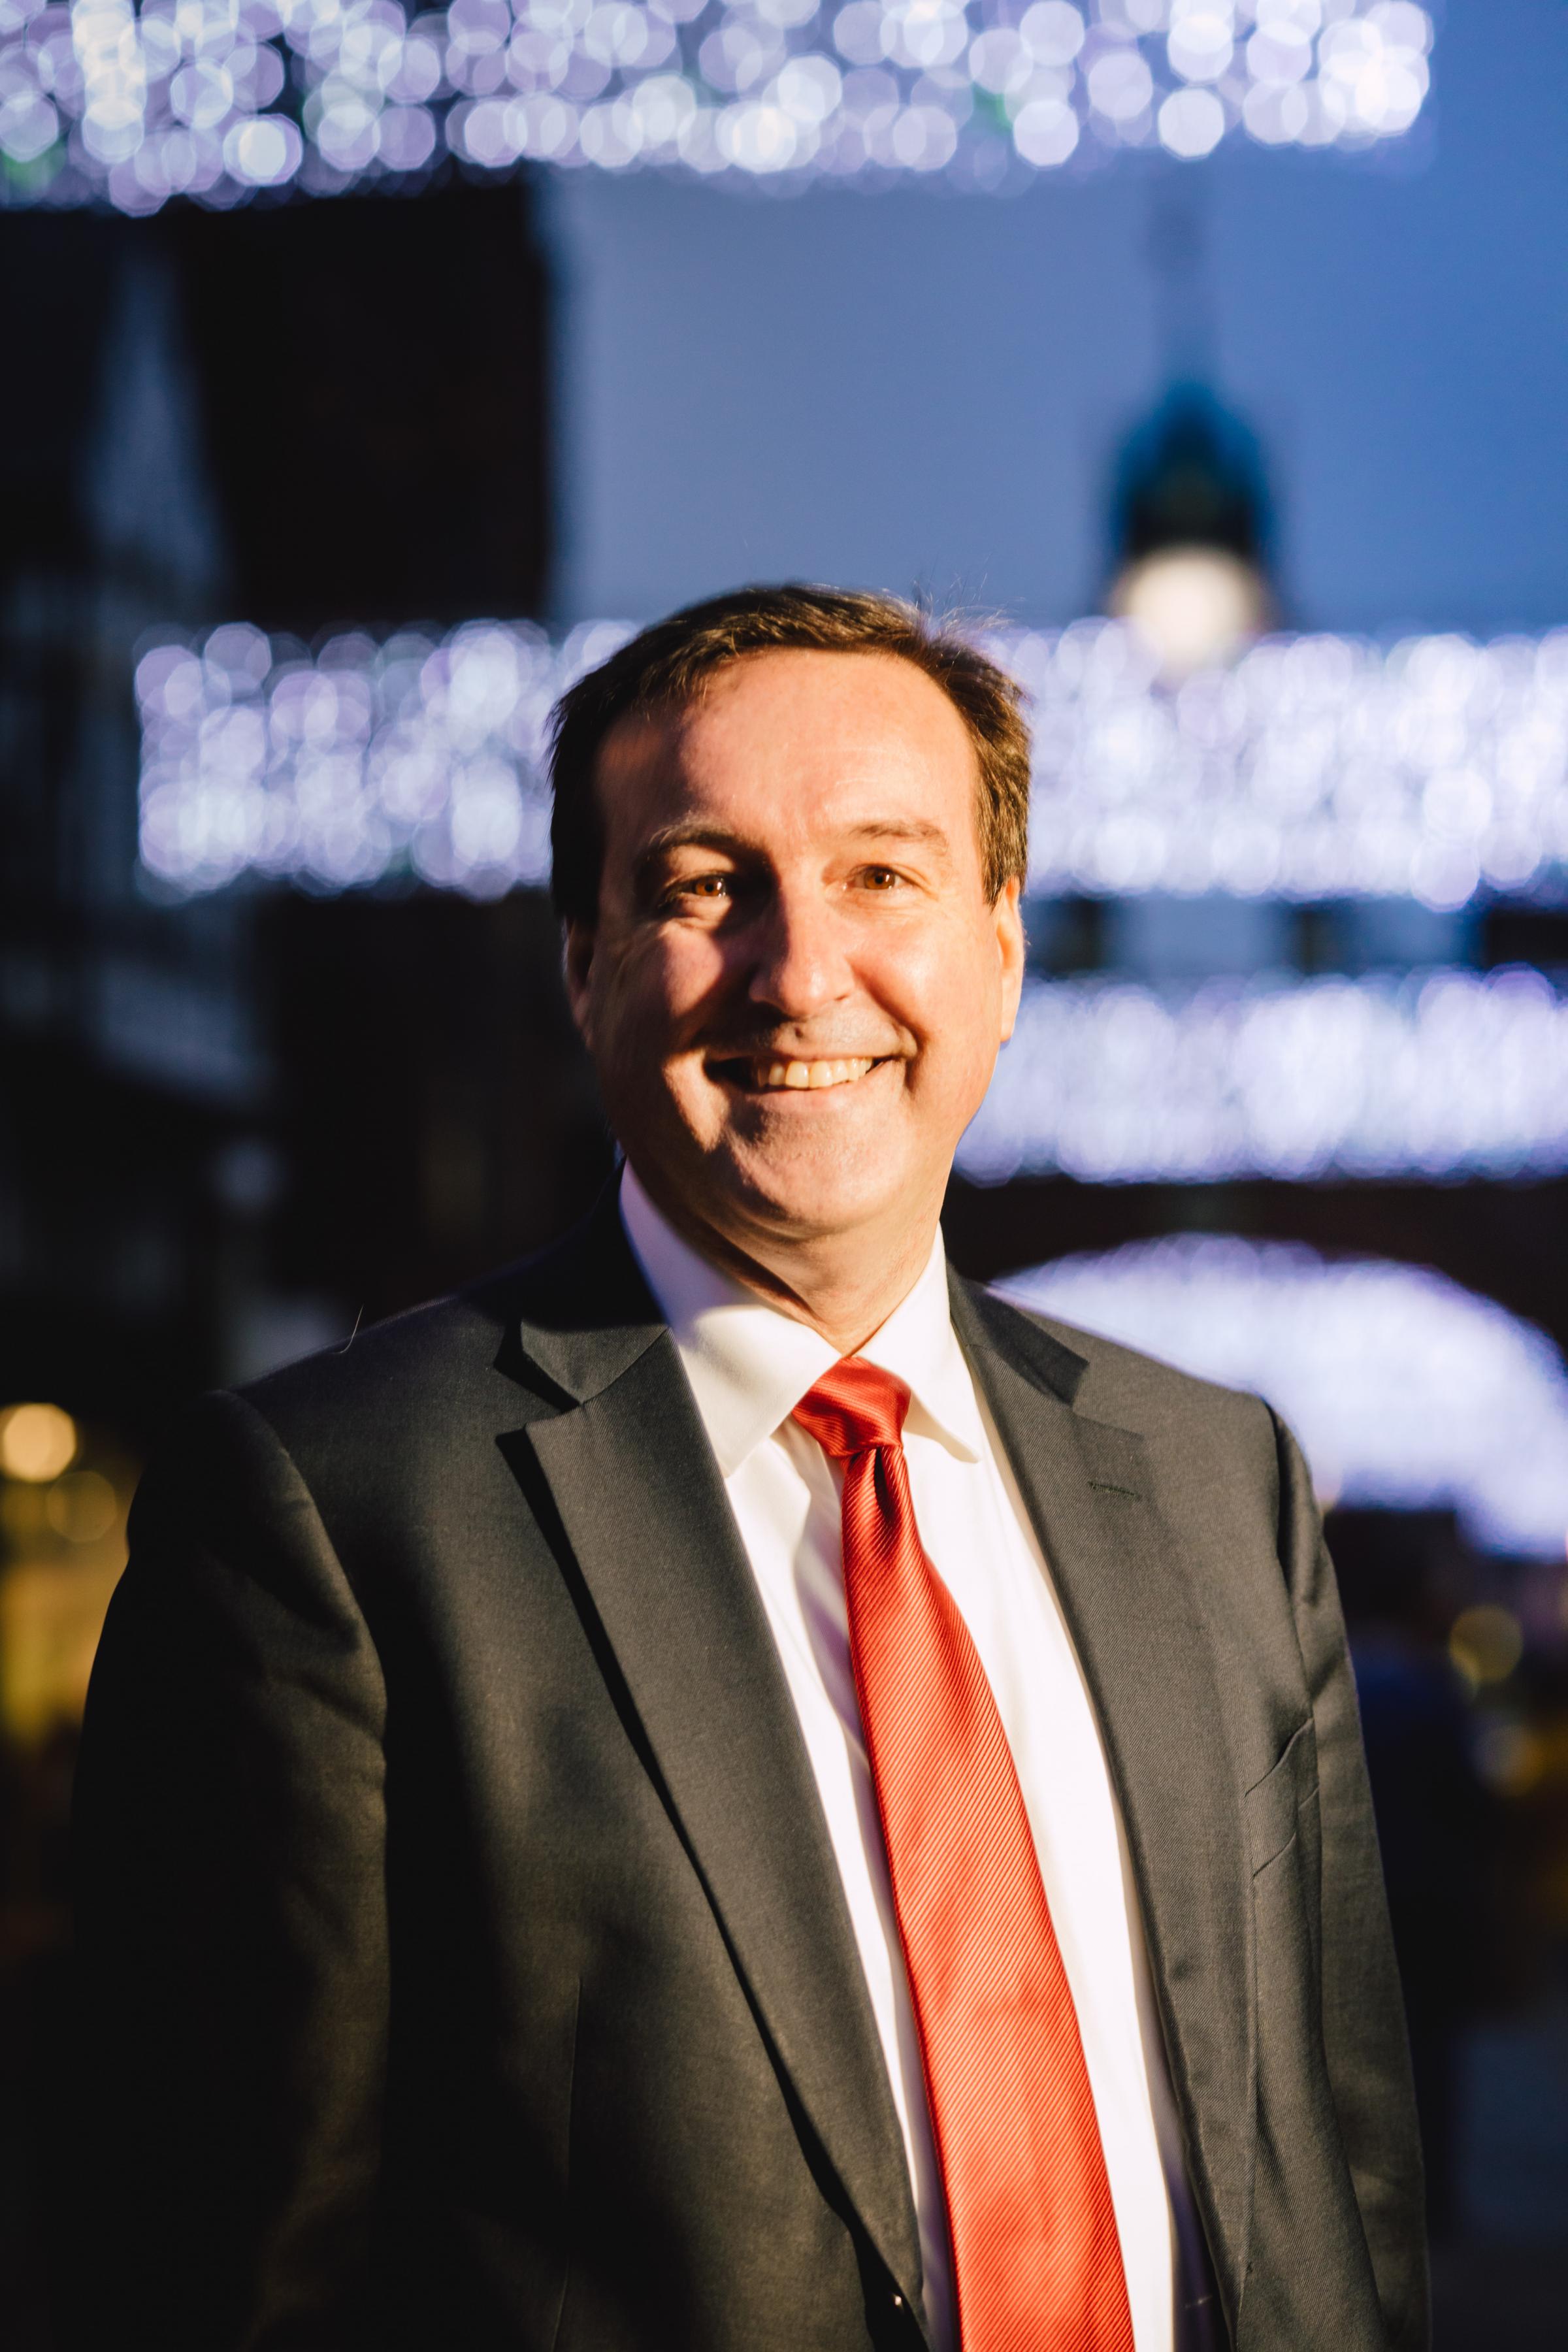 City of Chester MP Chris Matheson is urging people to shop local this Christmas.